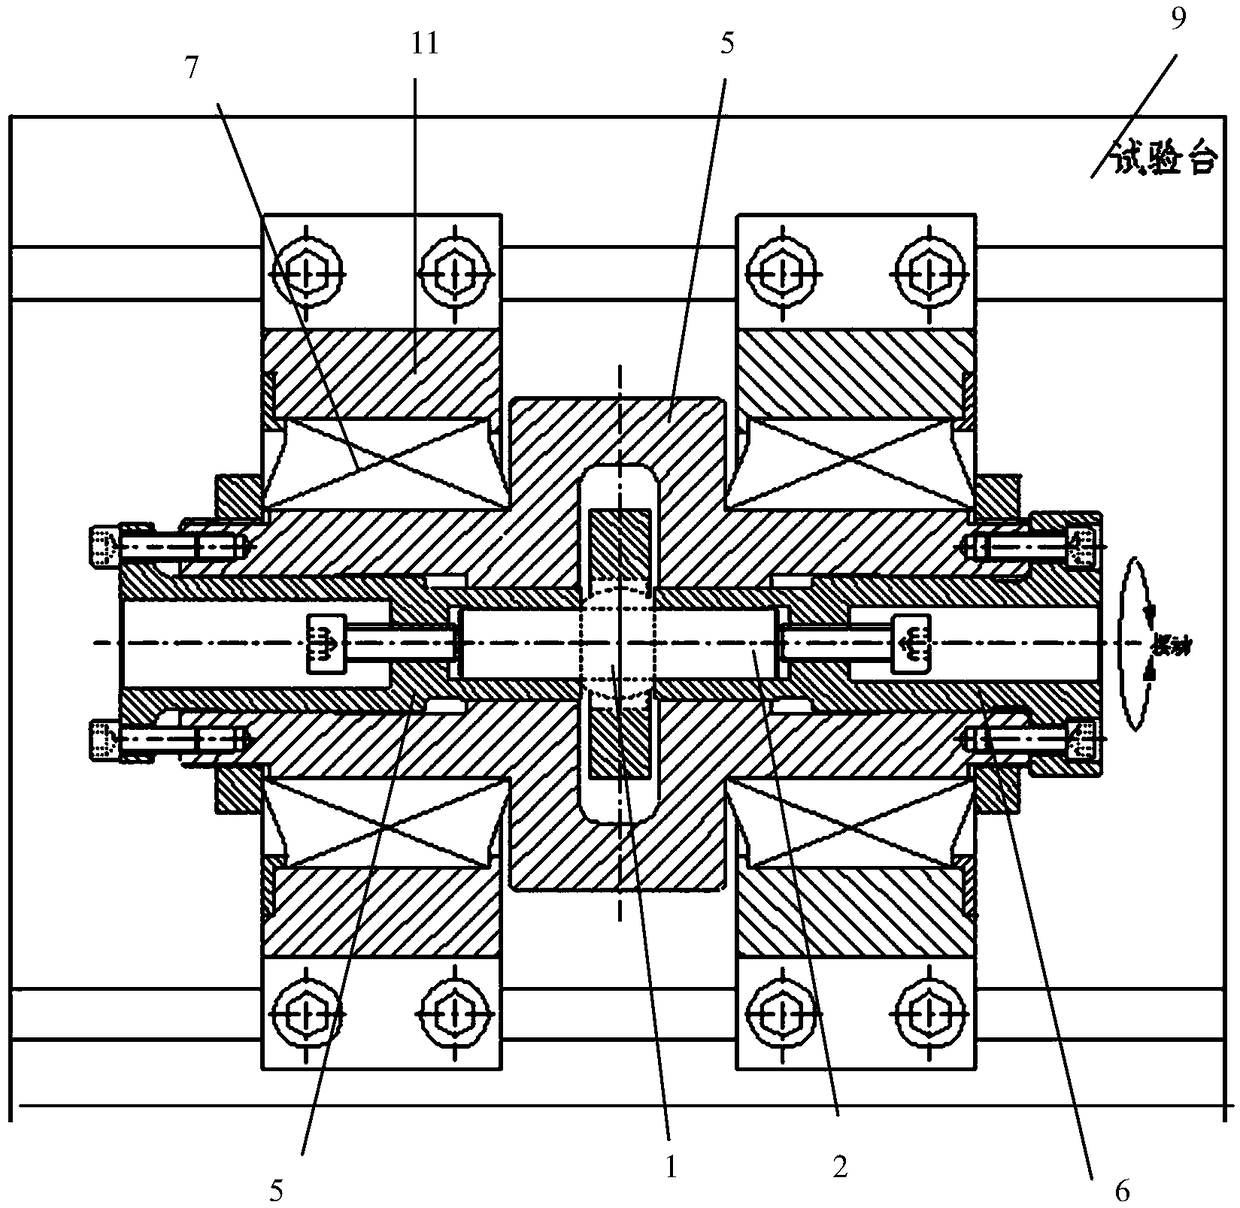 Joint bearing testing device